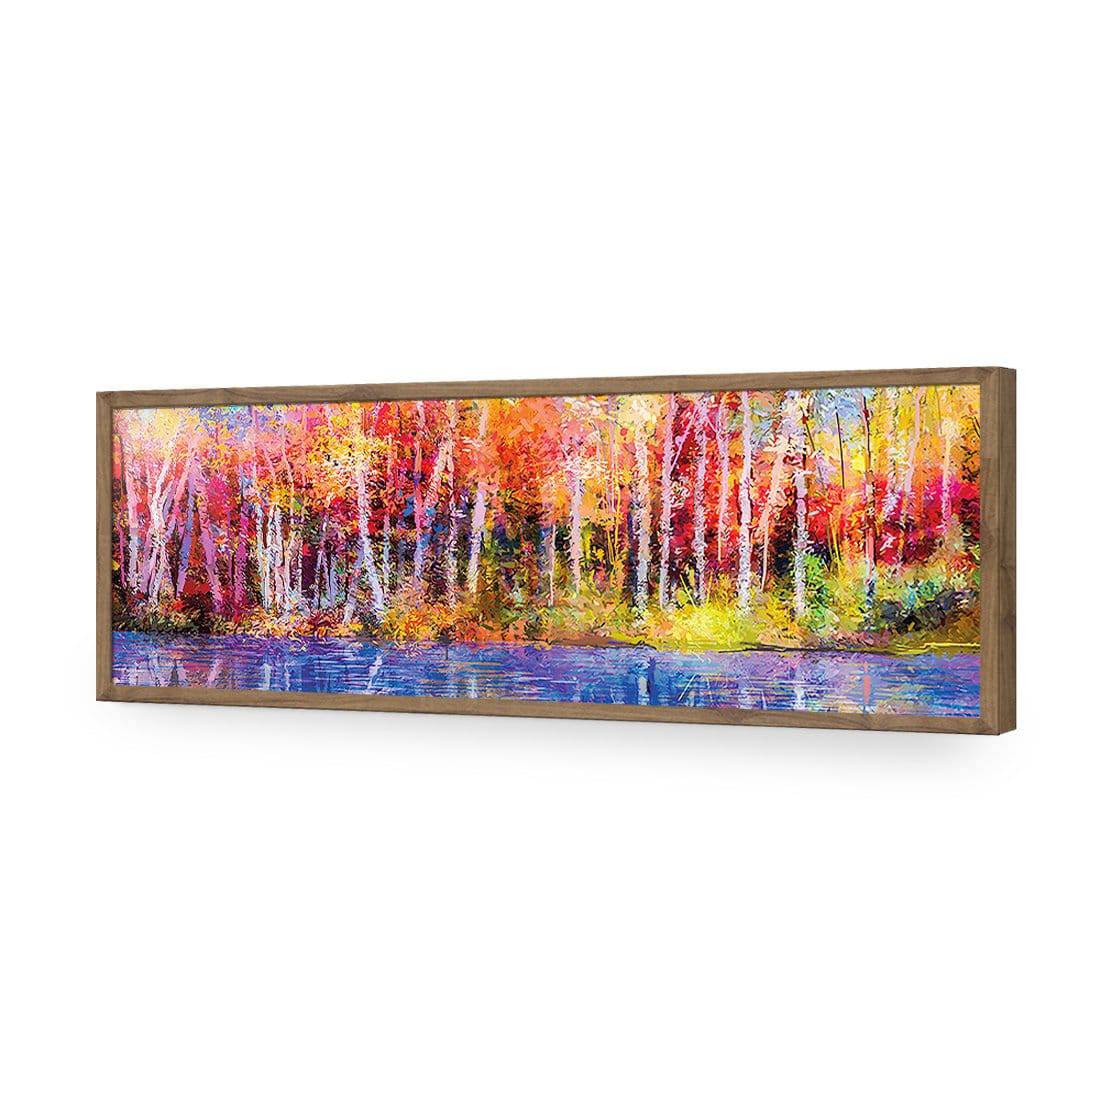 Rainbow Tree Forest, Long-Acrylic-Wall Art Design-Without Border-Acrylic - Natural Frame-60x20cm-Wall Art Designs